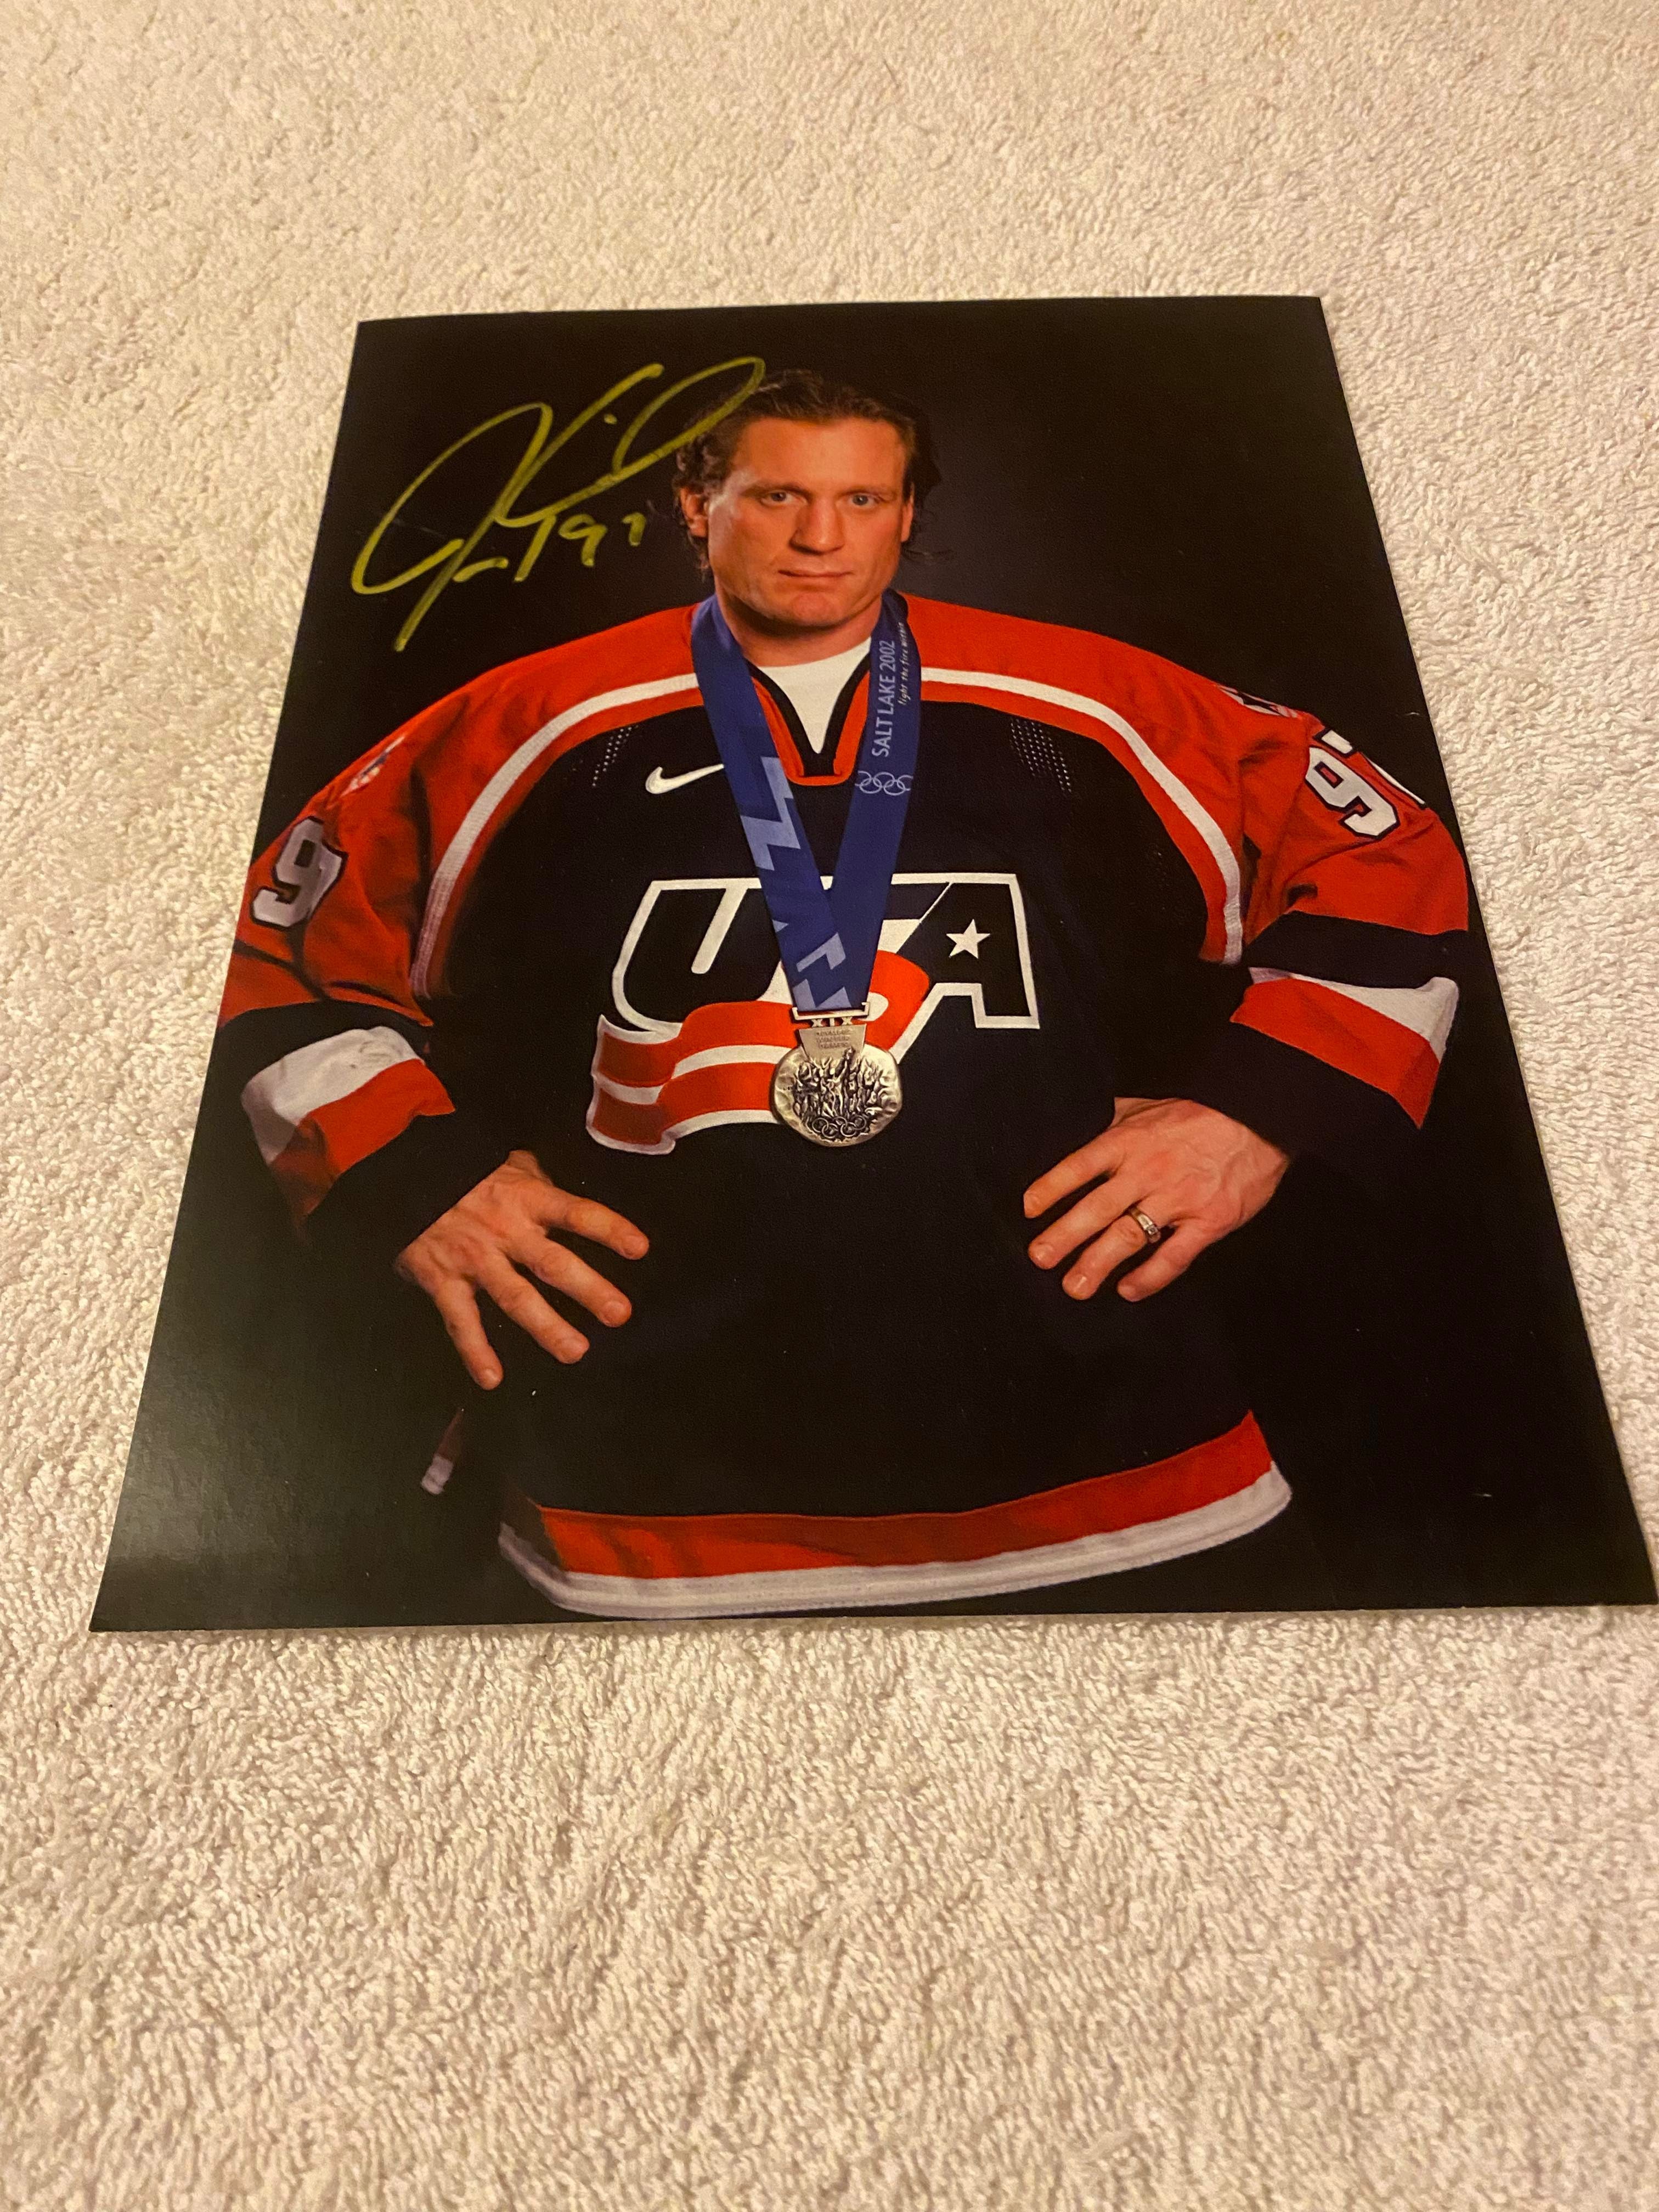 Jeremy Roenick Autographed Rookie Card